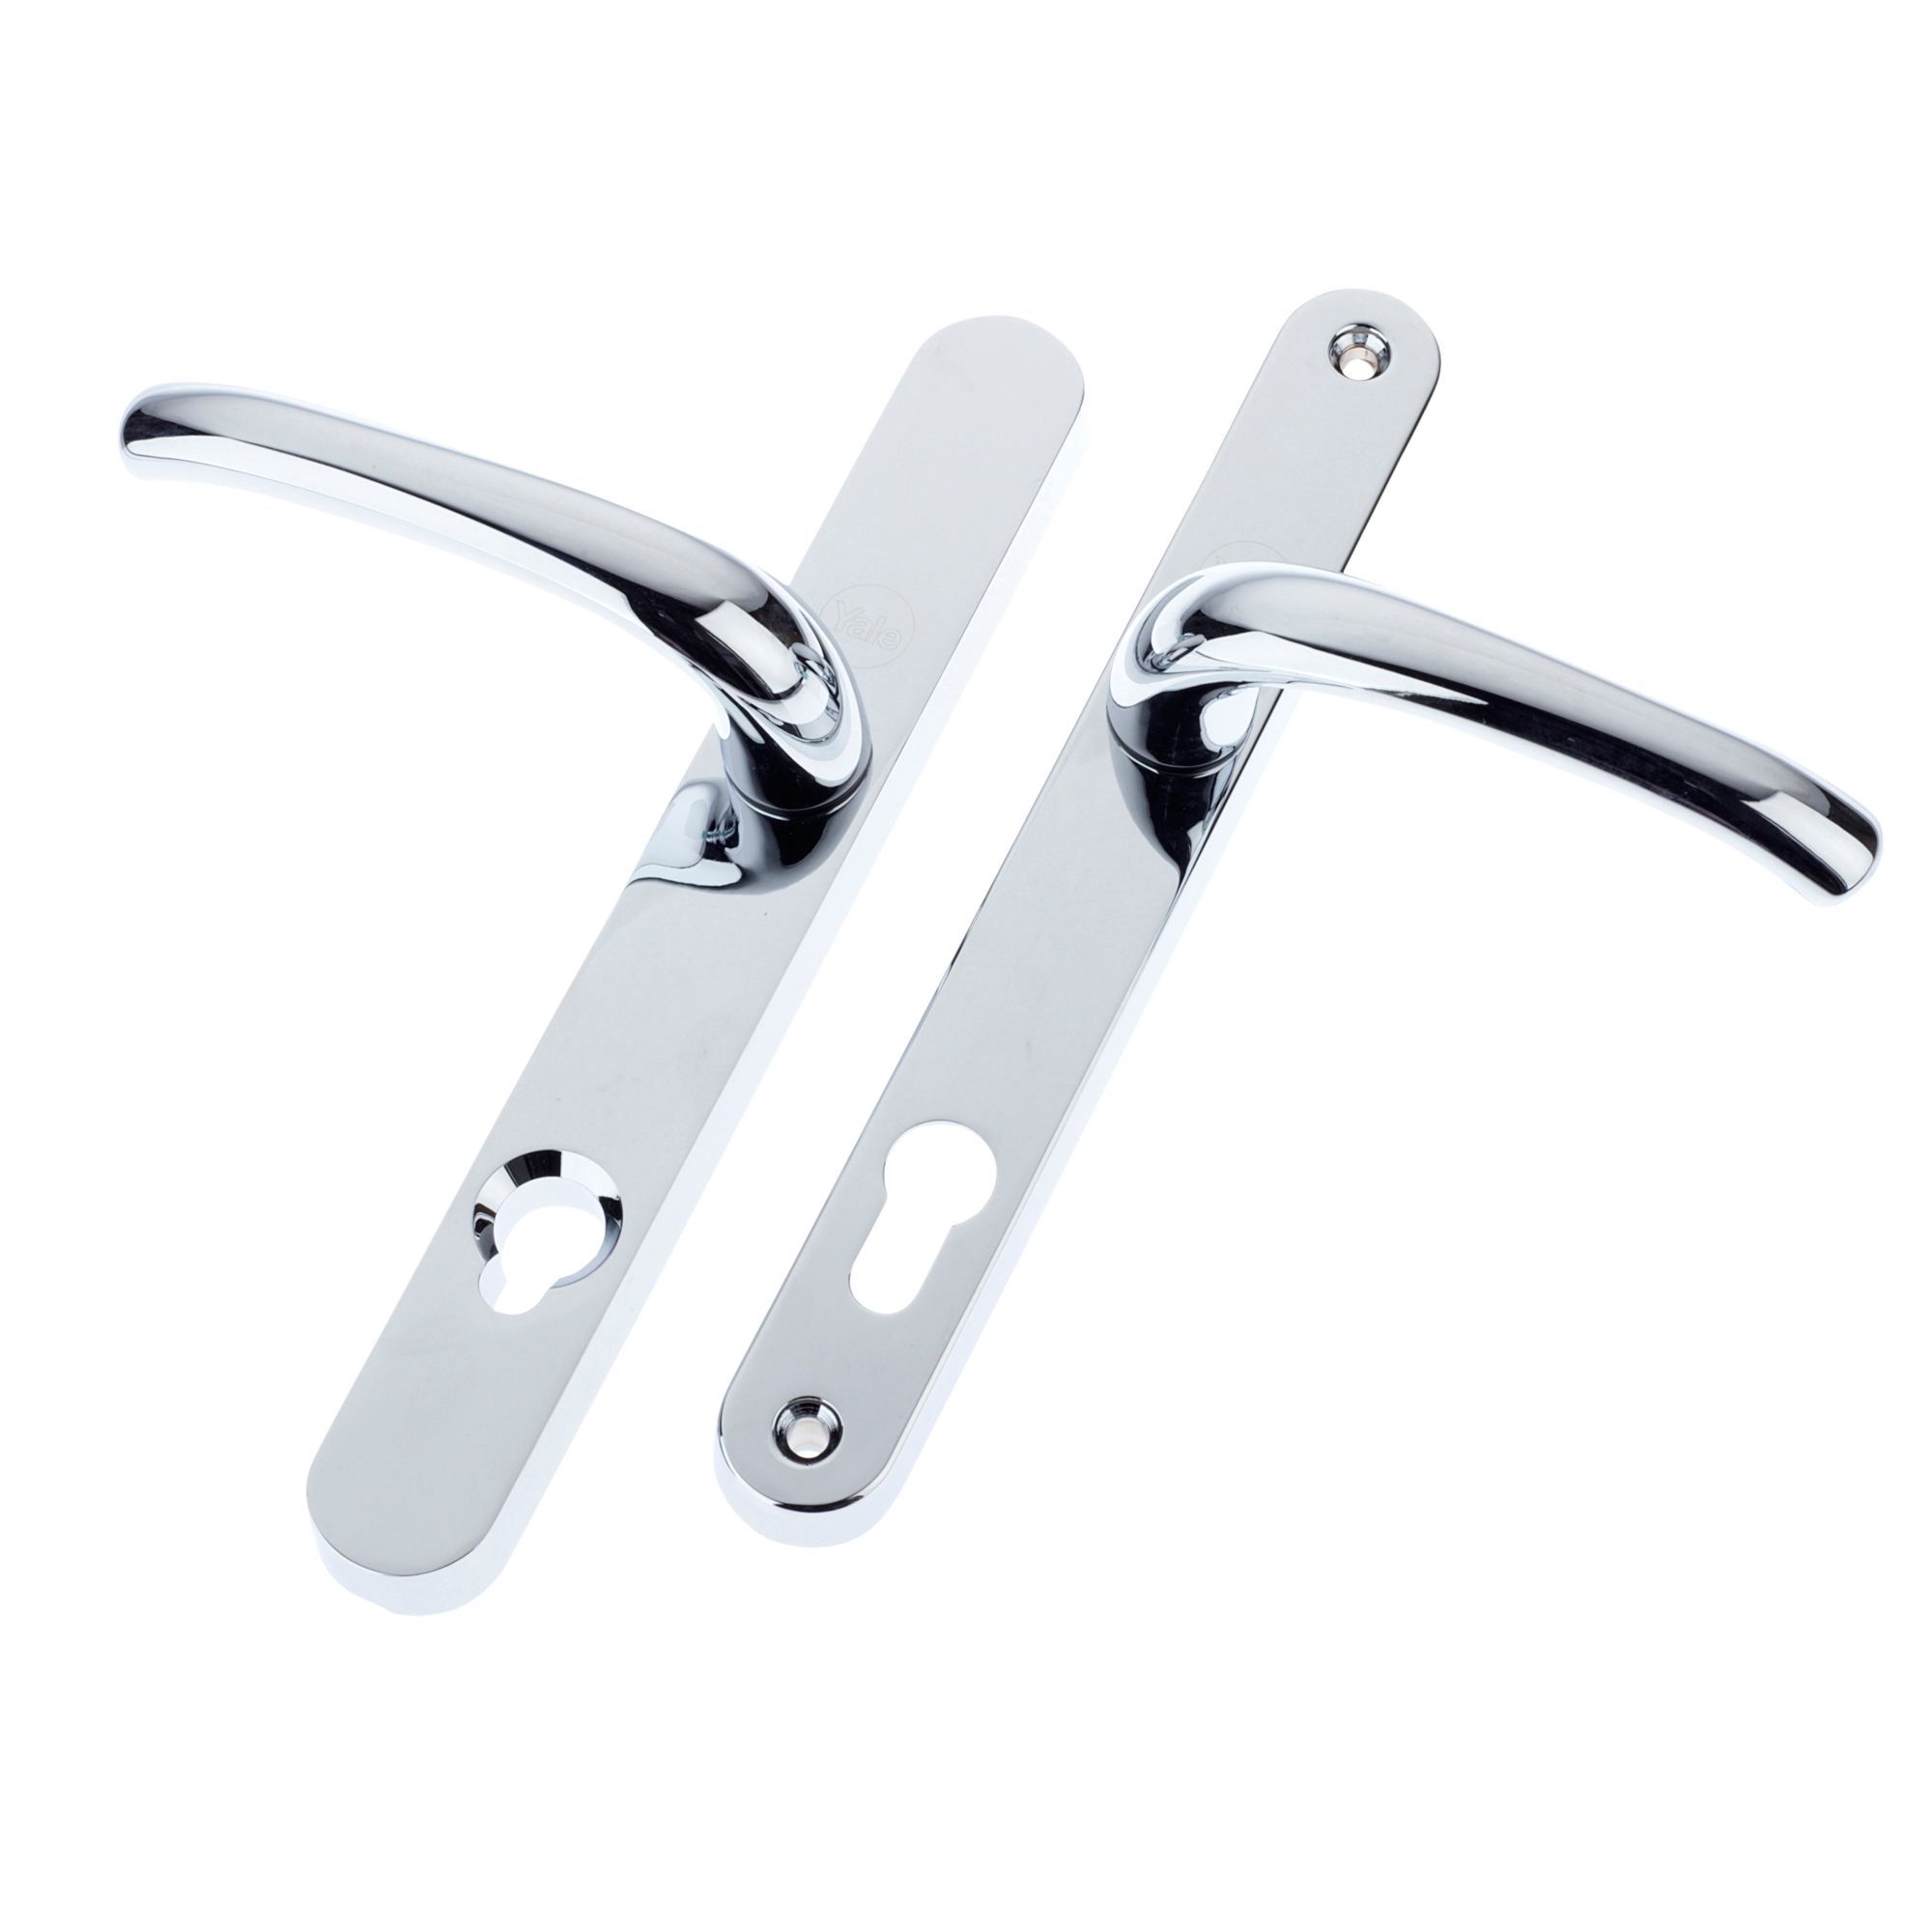 Yale Chrome effect Curved Lock Door handle